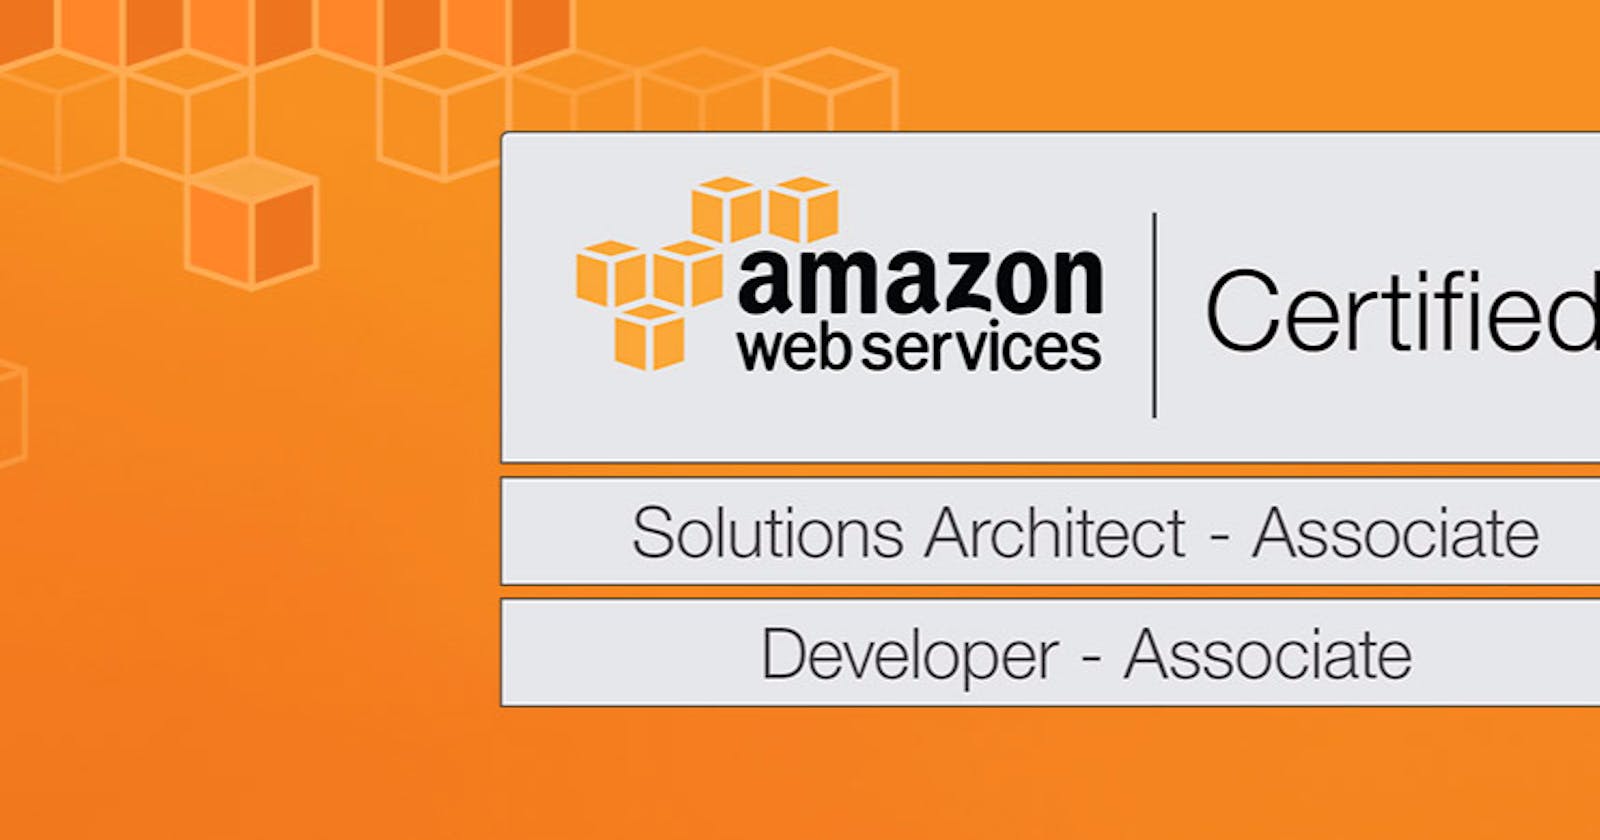 Preparing to pass an AWS certification could improve your skills significantly